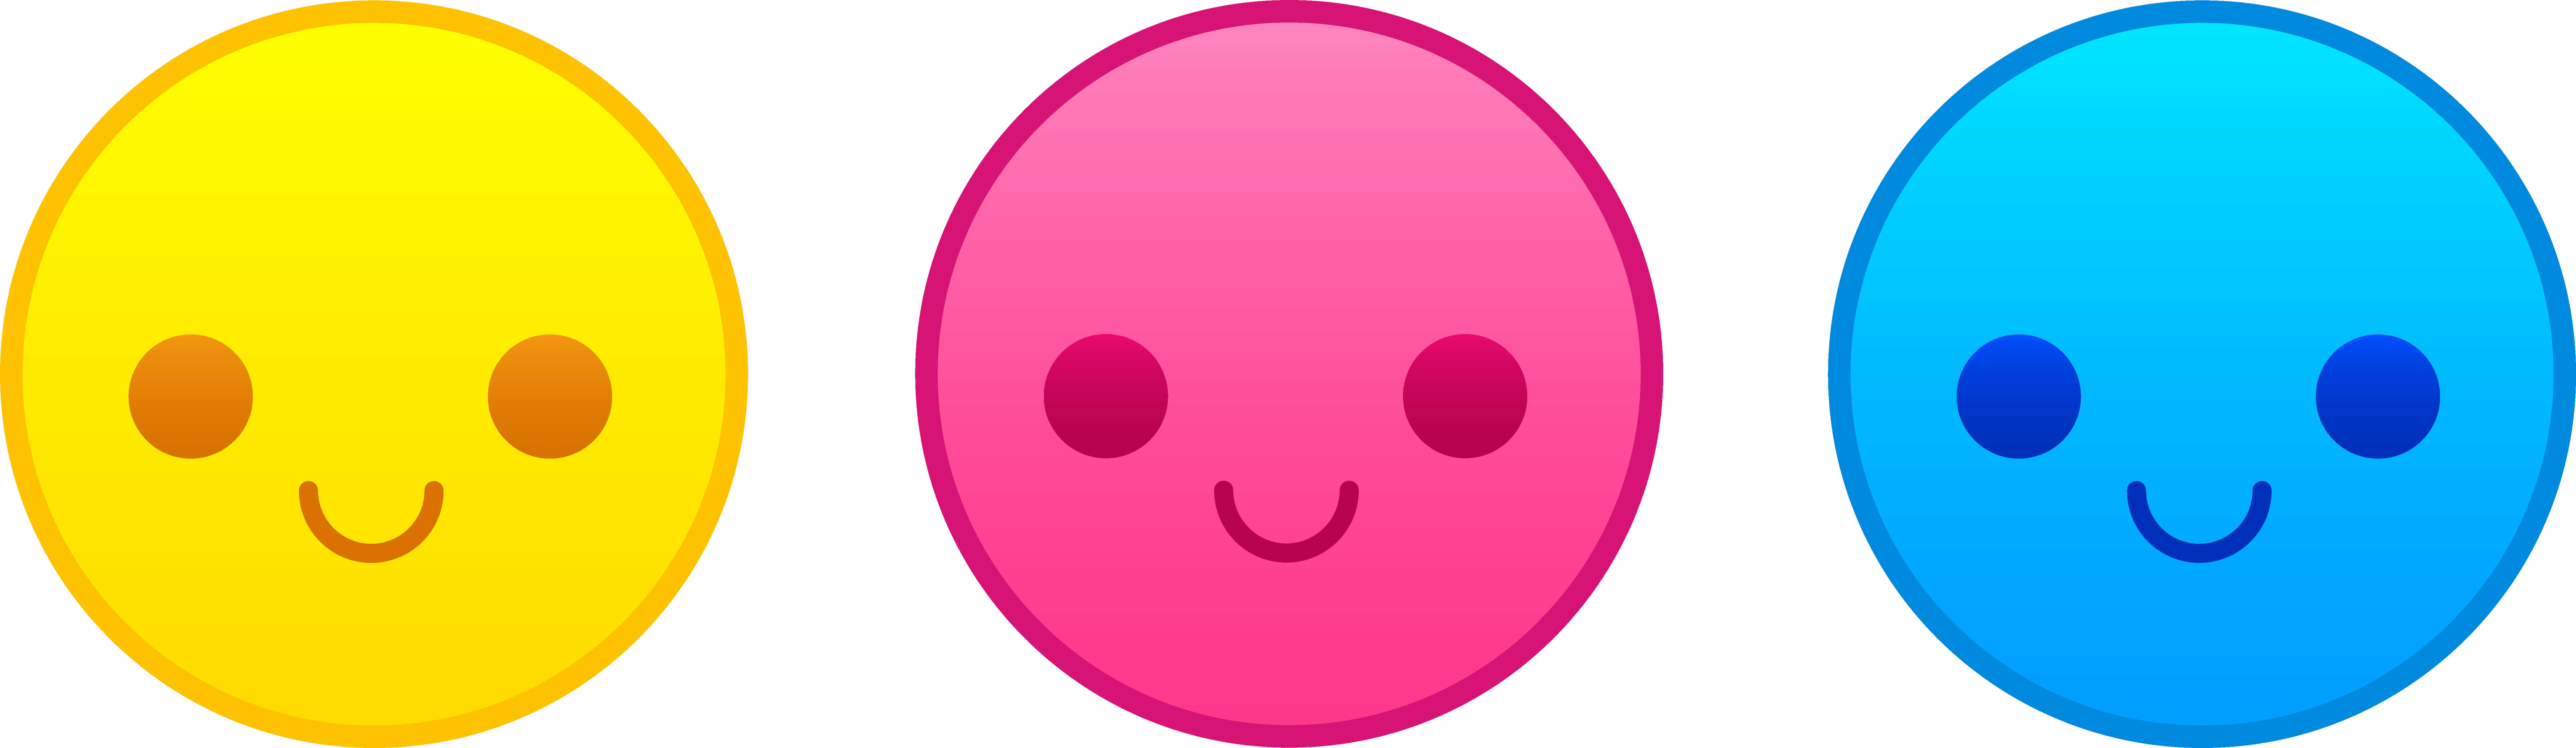 Images For > Pink Smiley Face Backgrounds Clipart - Free to use ...